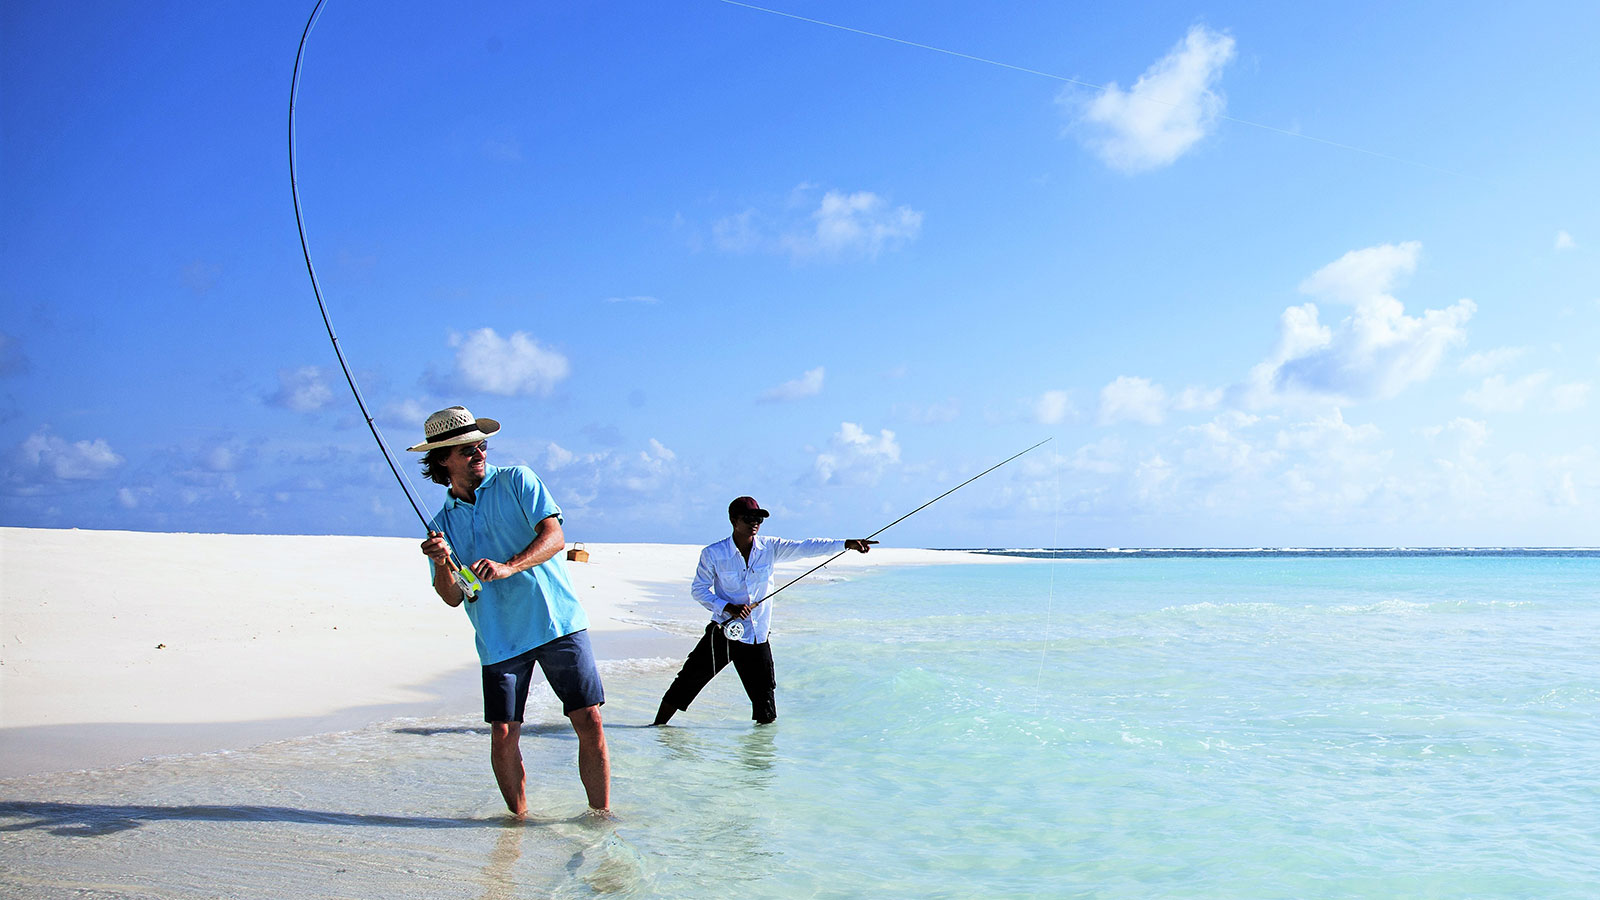 Fishing in the Maldives: what to catch, when, places, prices, tips